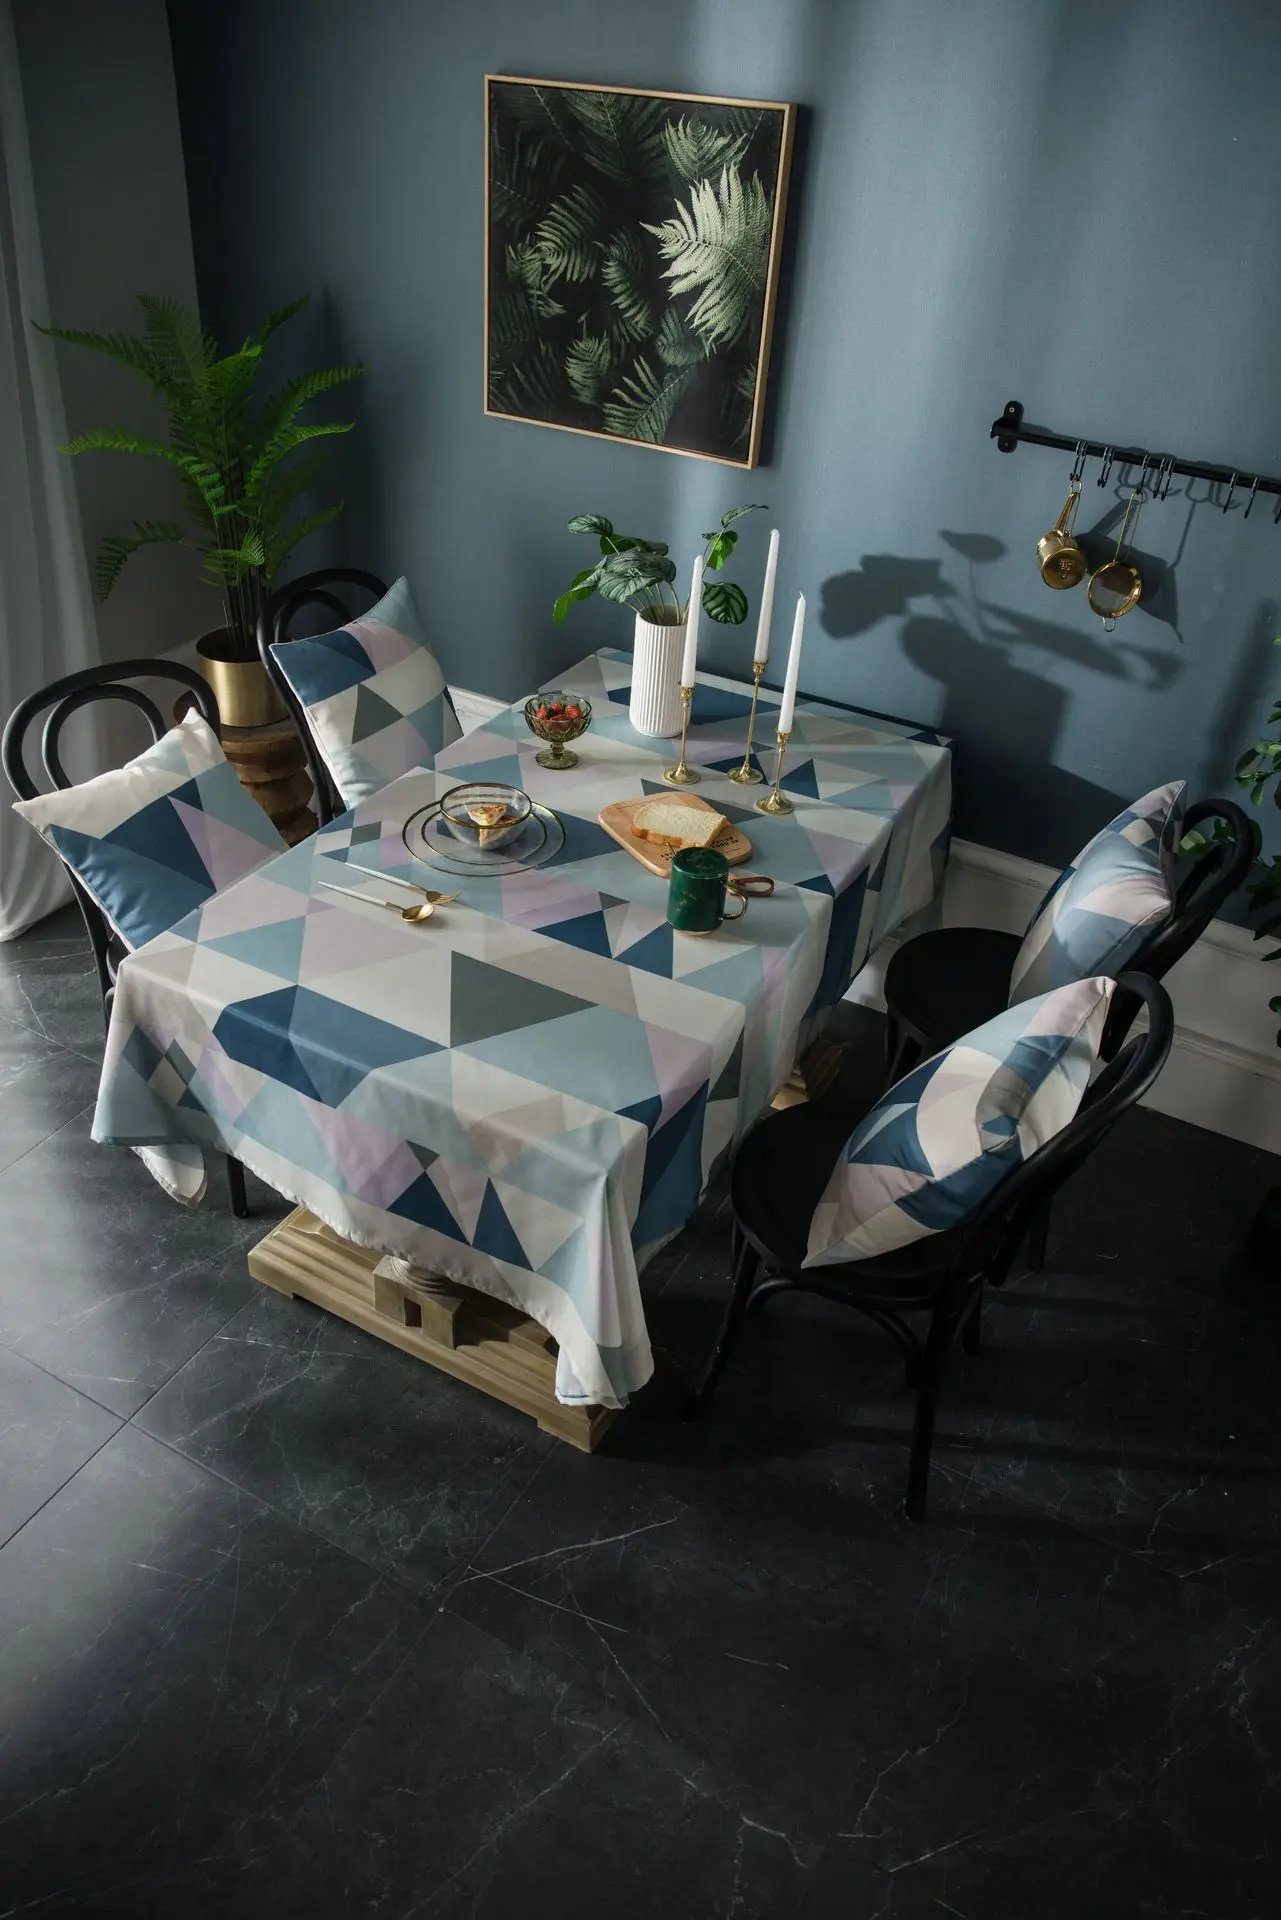 Waterproof table cloth Nordic Geometric Printed Tablecloth Dining Table Coffee Table Cover For Restaurant Banquet Kitchen Decor